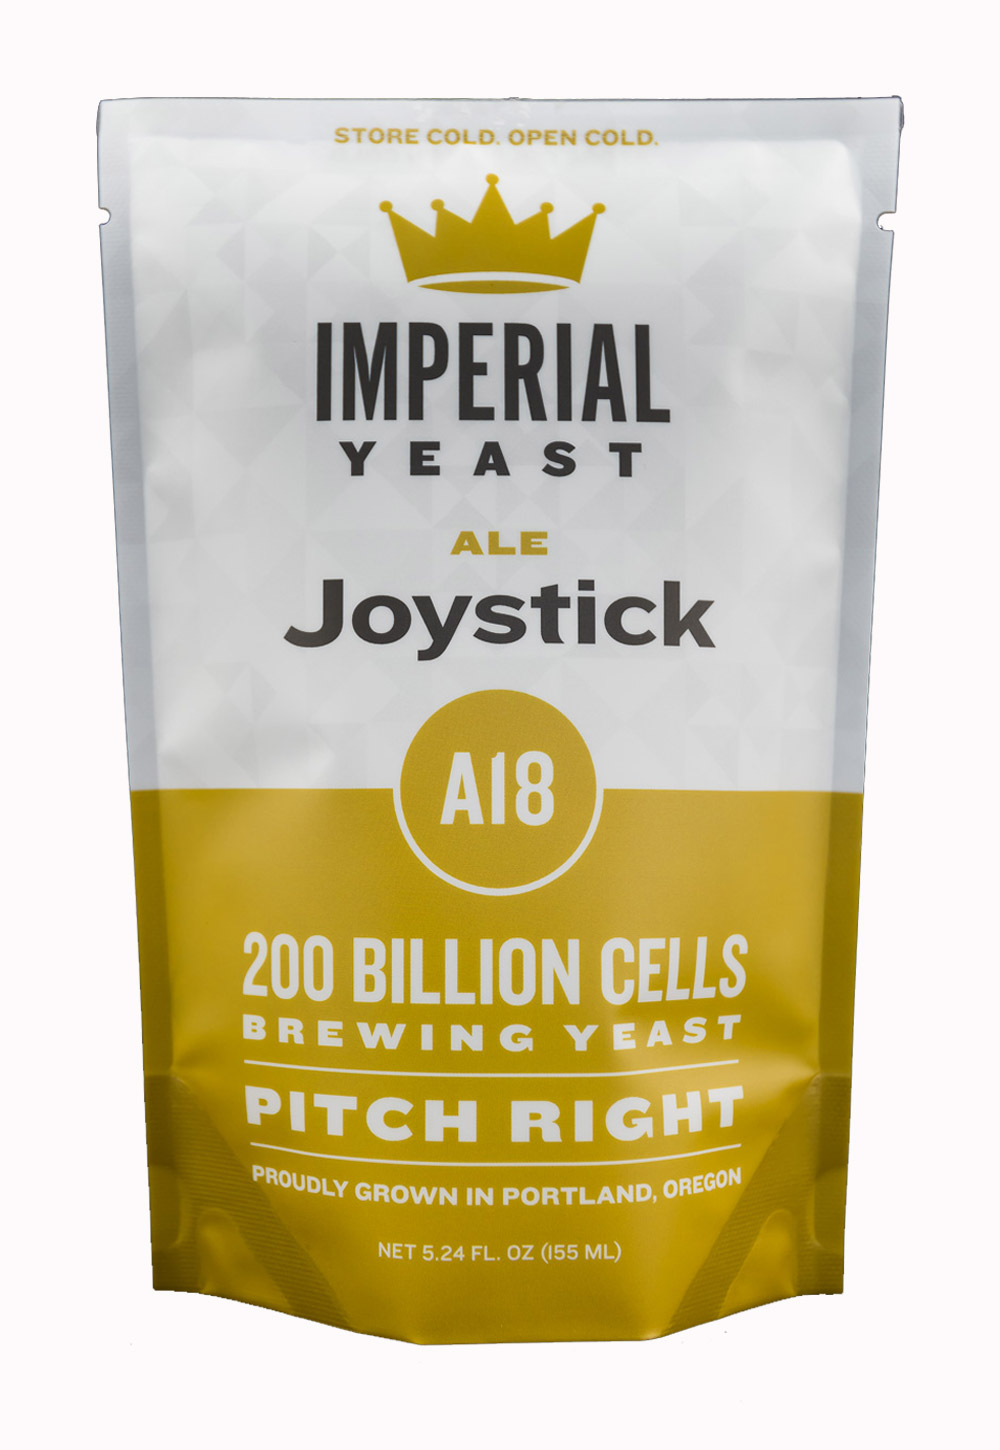 Imperial Yeast A18 Joystick